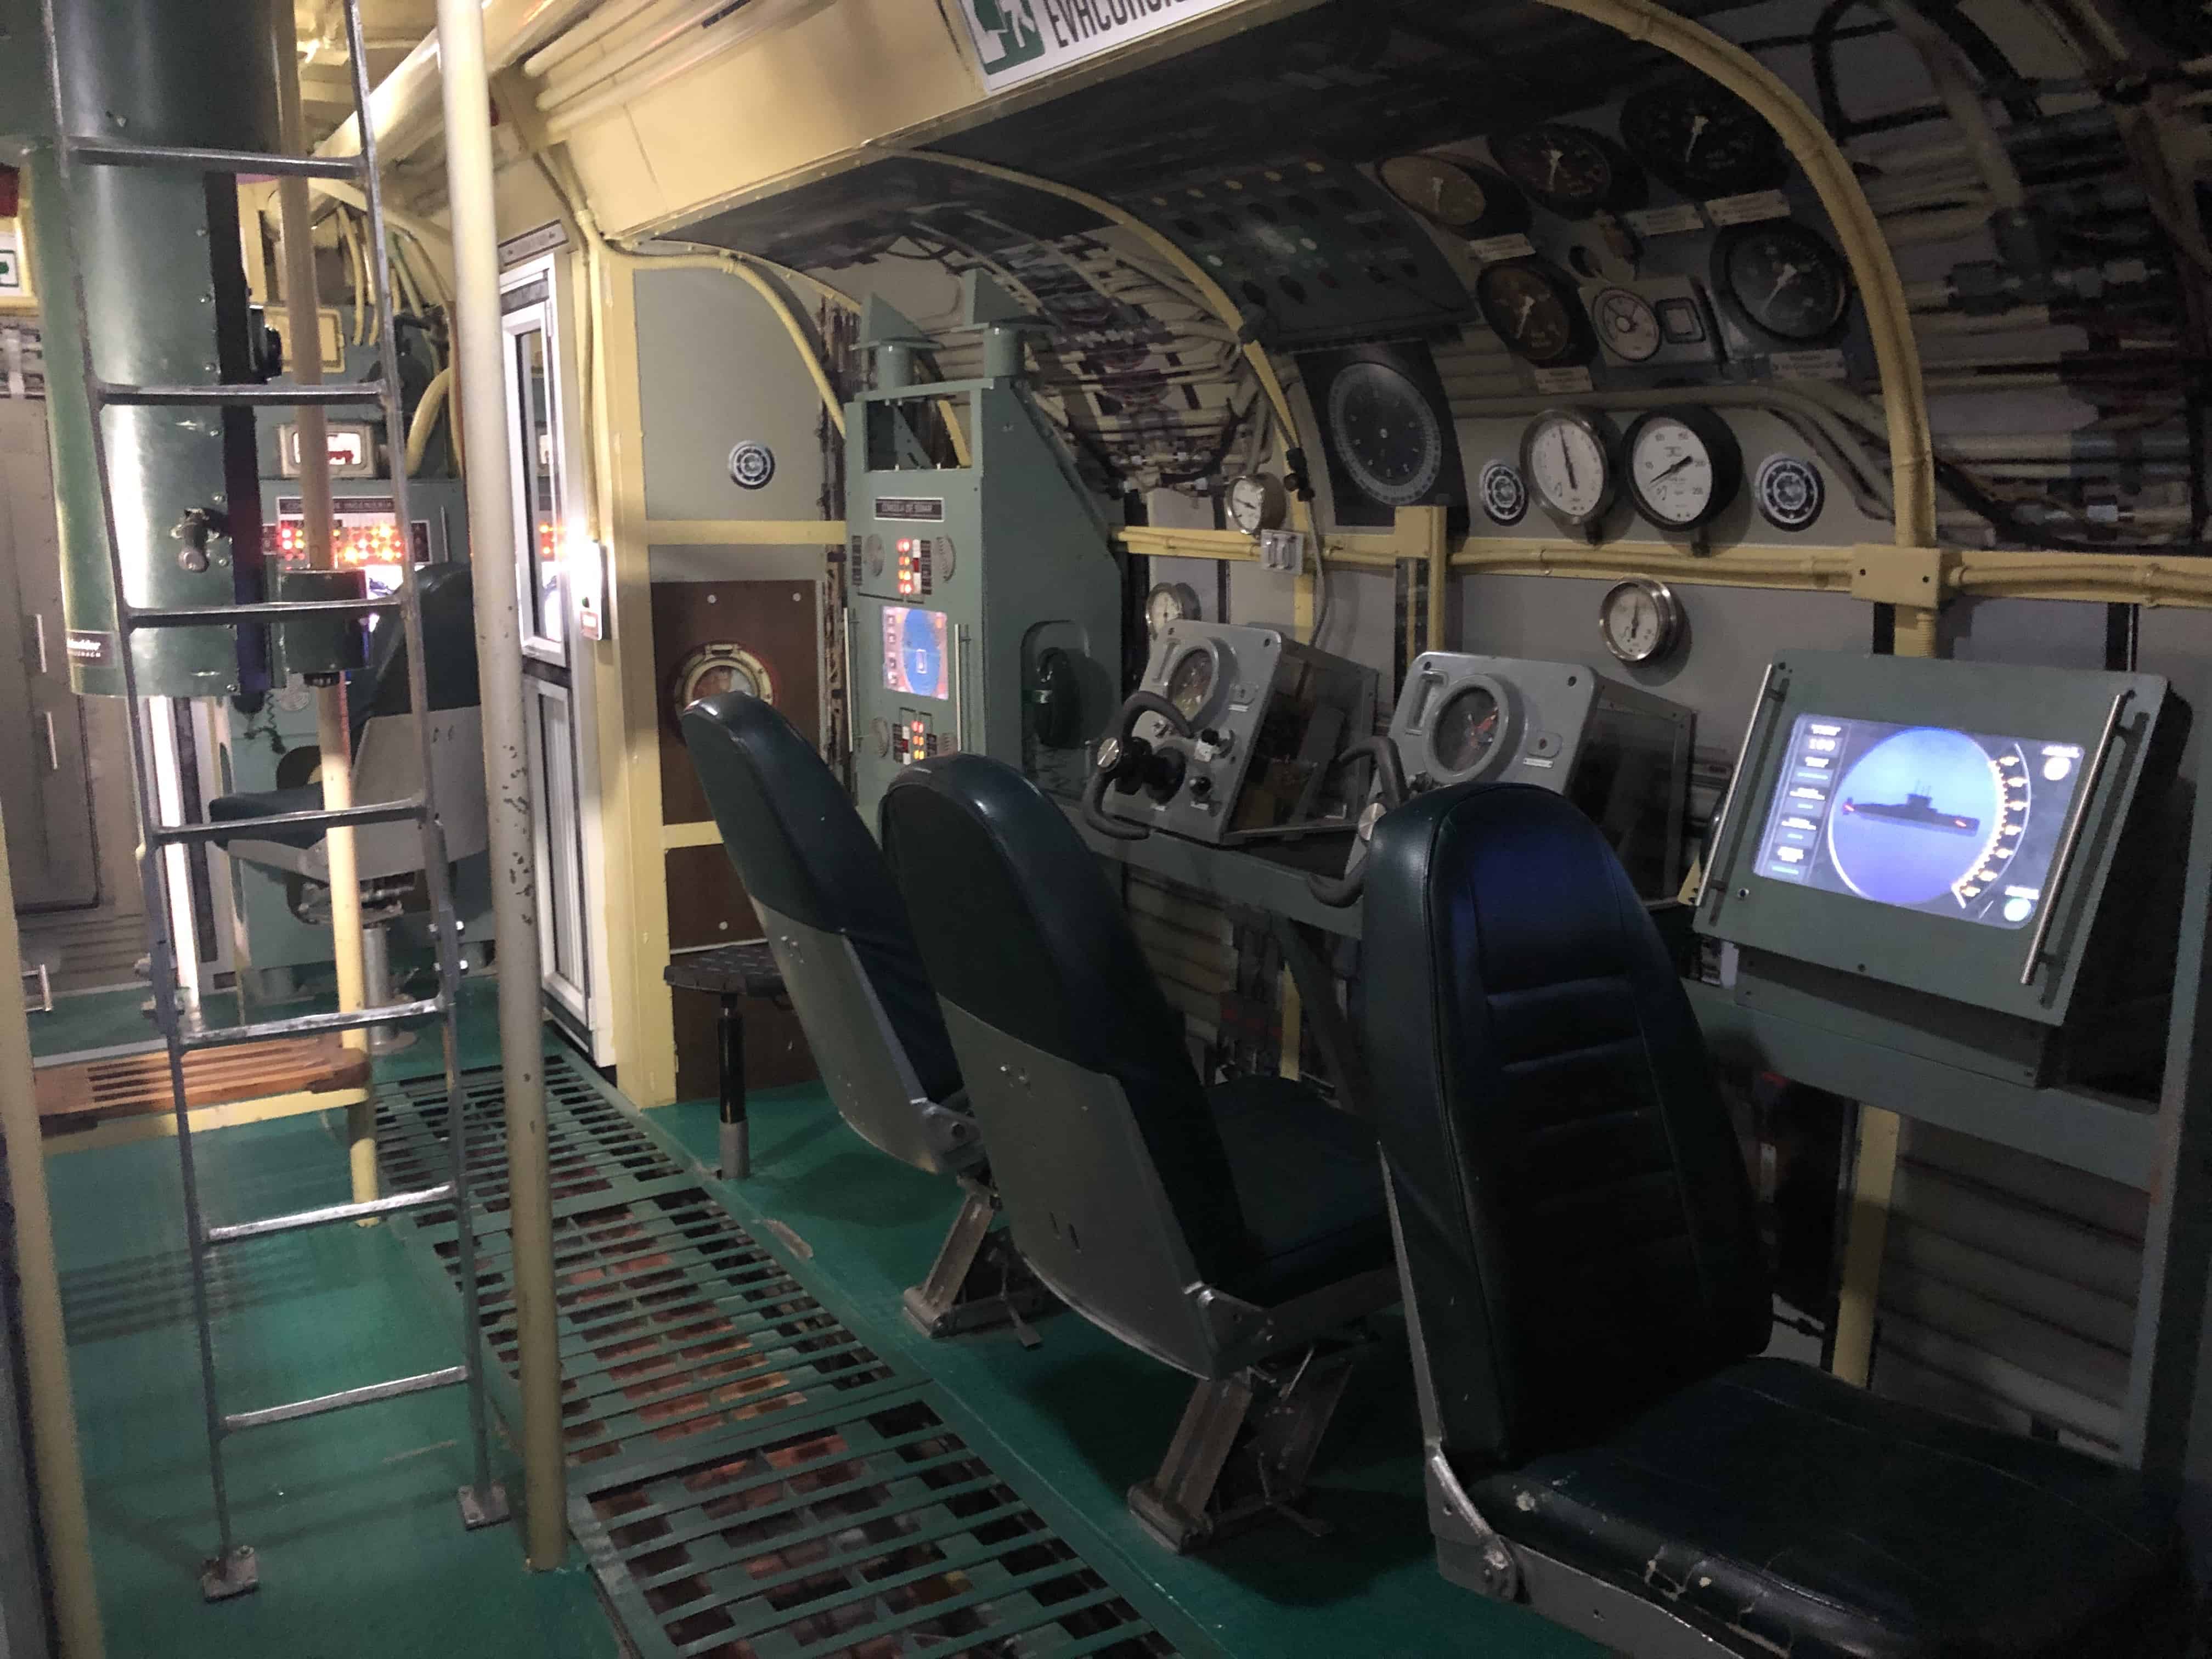 Submarine simulator at the Caribbean Naval Museum in Cartagena, Colombia